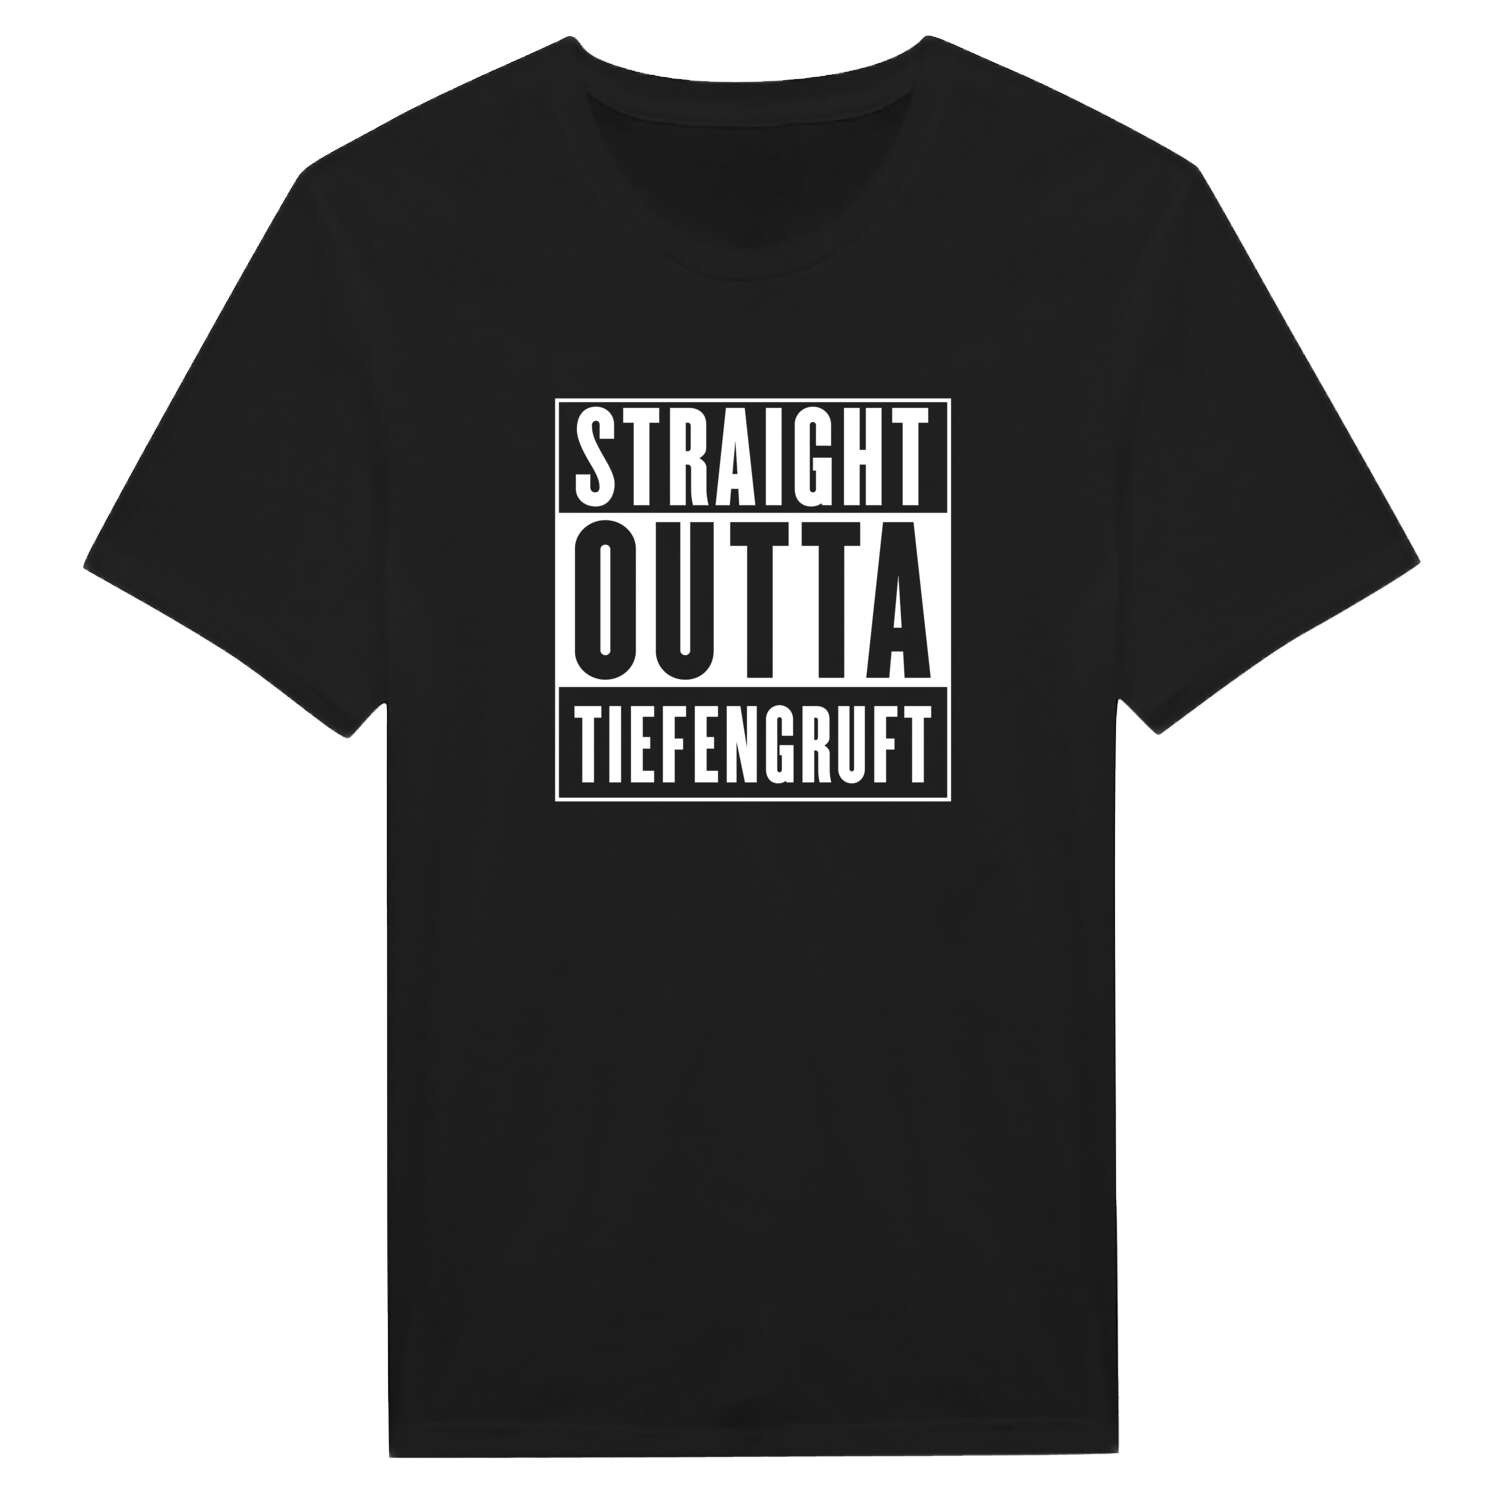 Tiefengruft T-Shirt »Straight Outta«